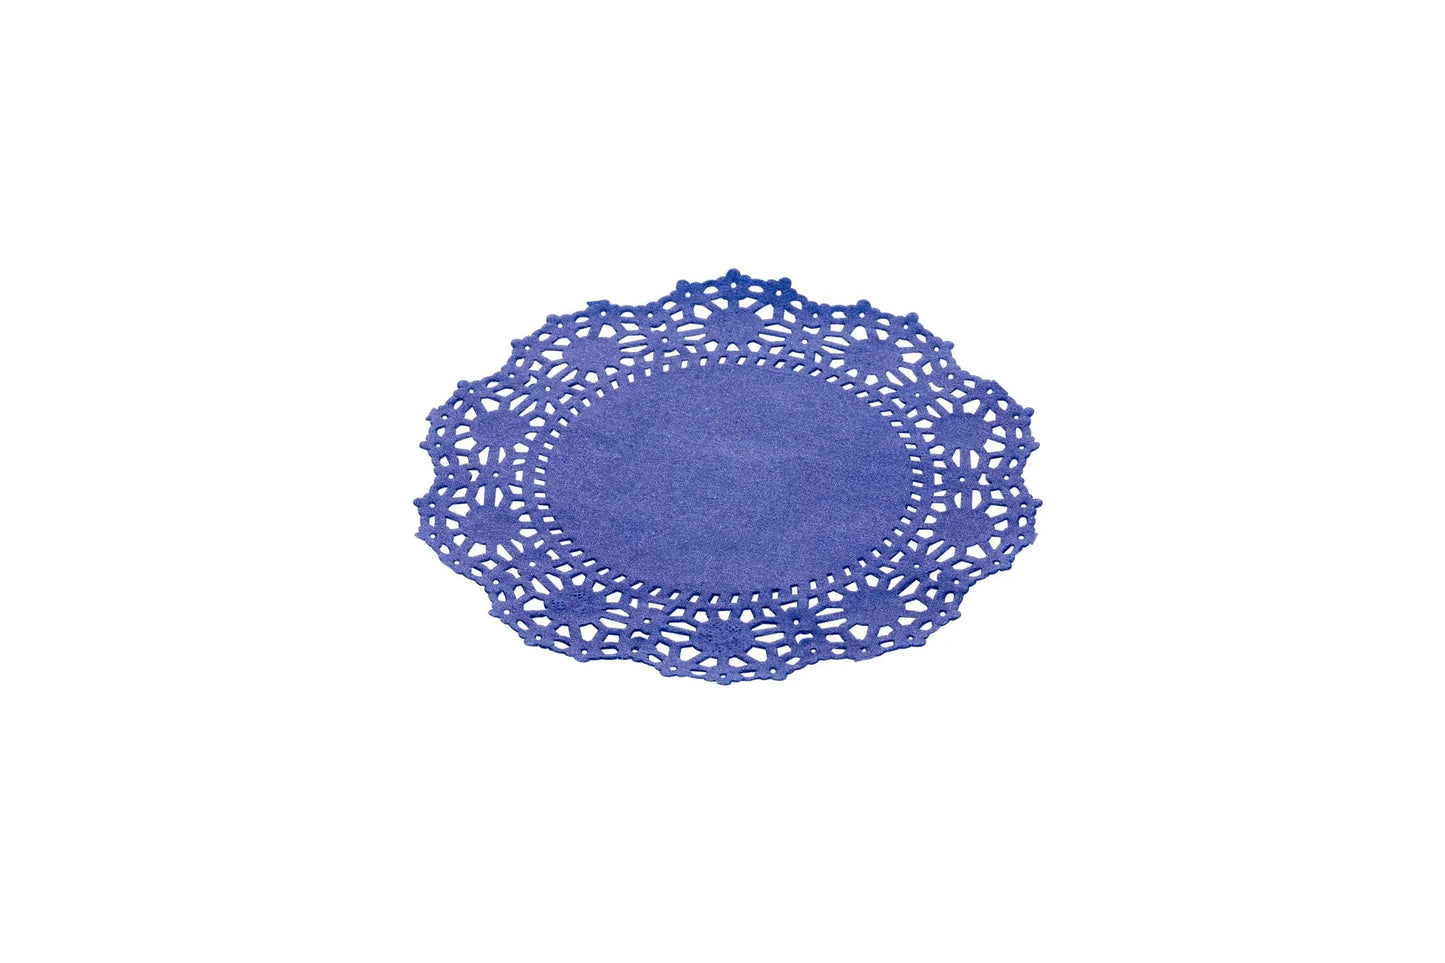 Pastry Tek Navy Blue Paper Doilies - Lace - 4" x 4" - 100 count box - www.ecoware.ae                               